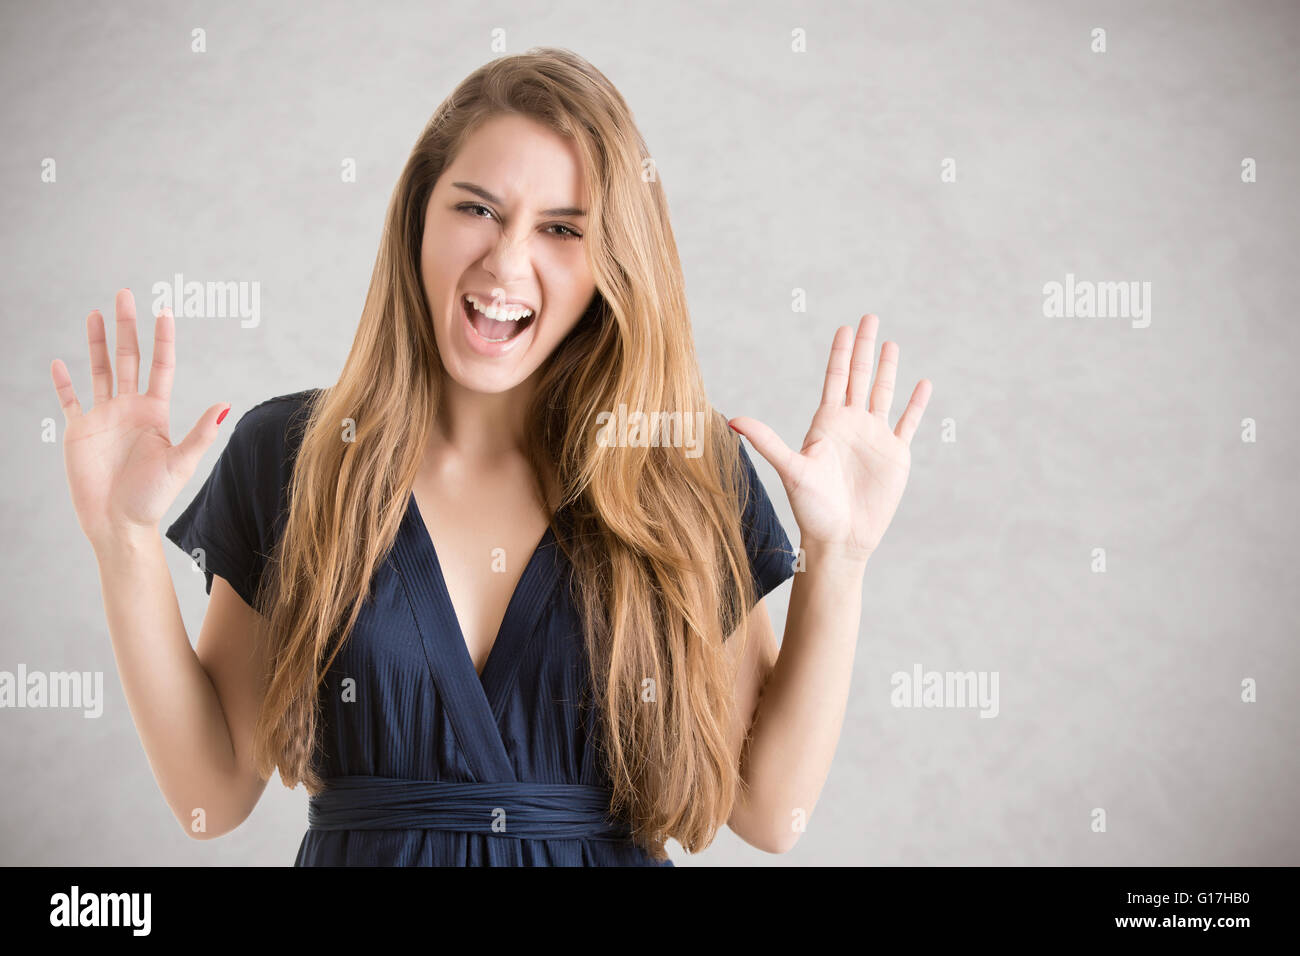 Woman suffering from a nervous breakdown, holding her hands up in the air, isolated in grey Stock Photo